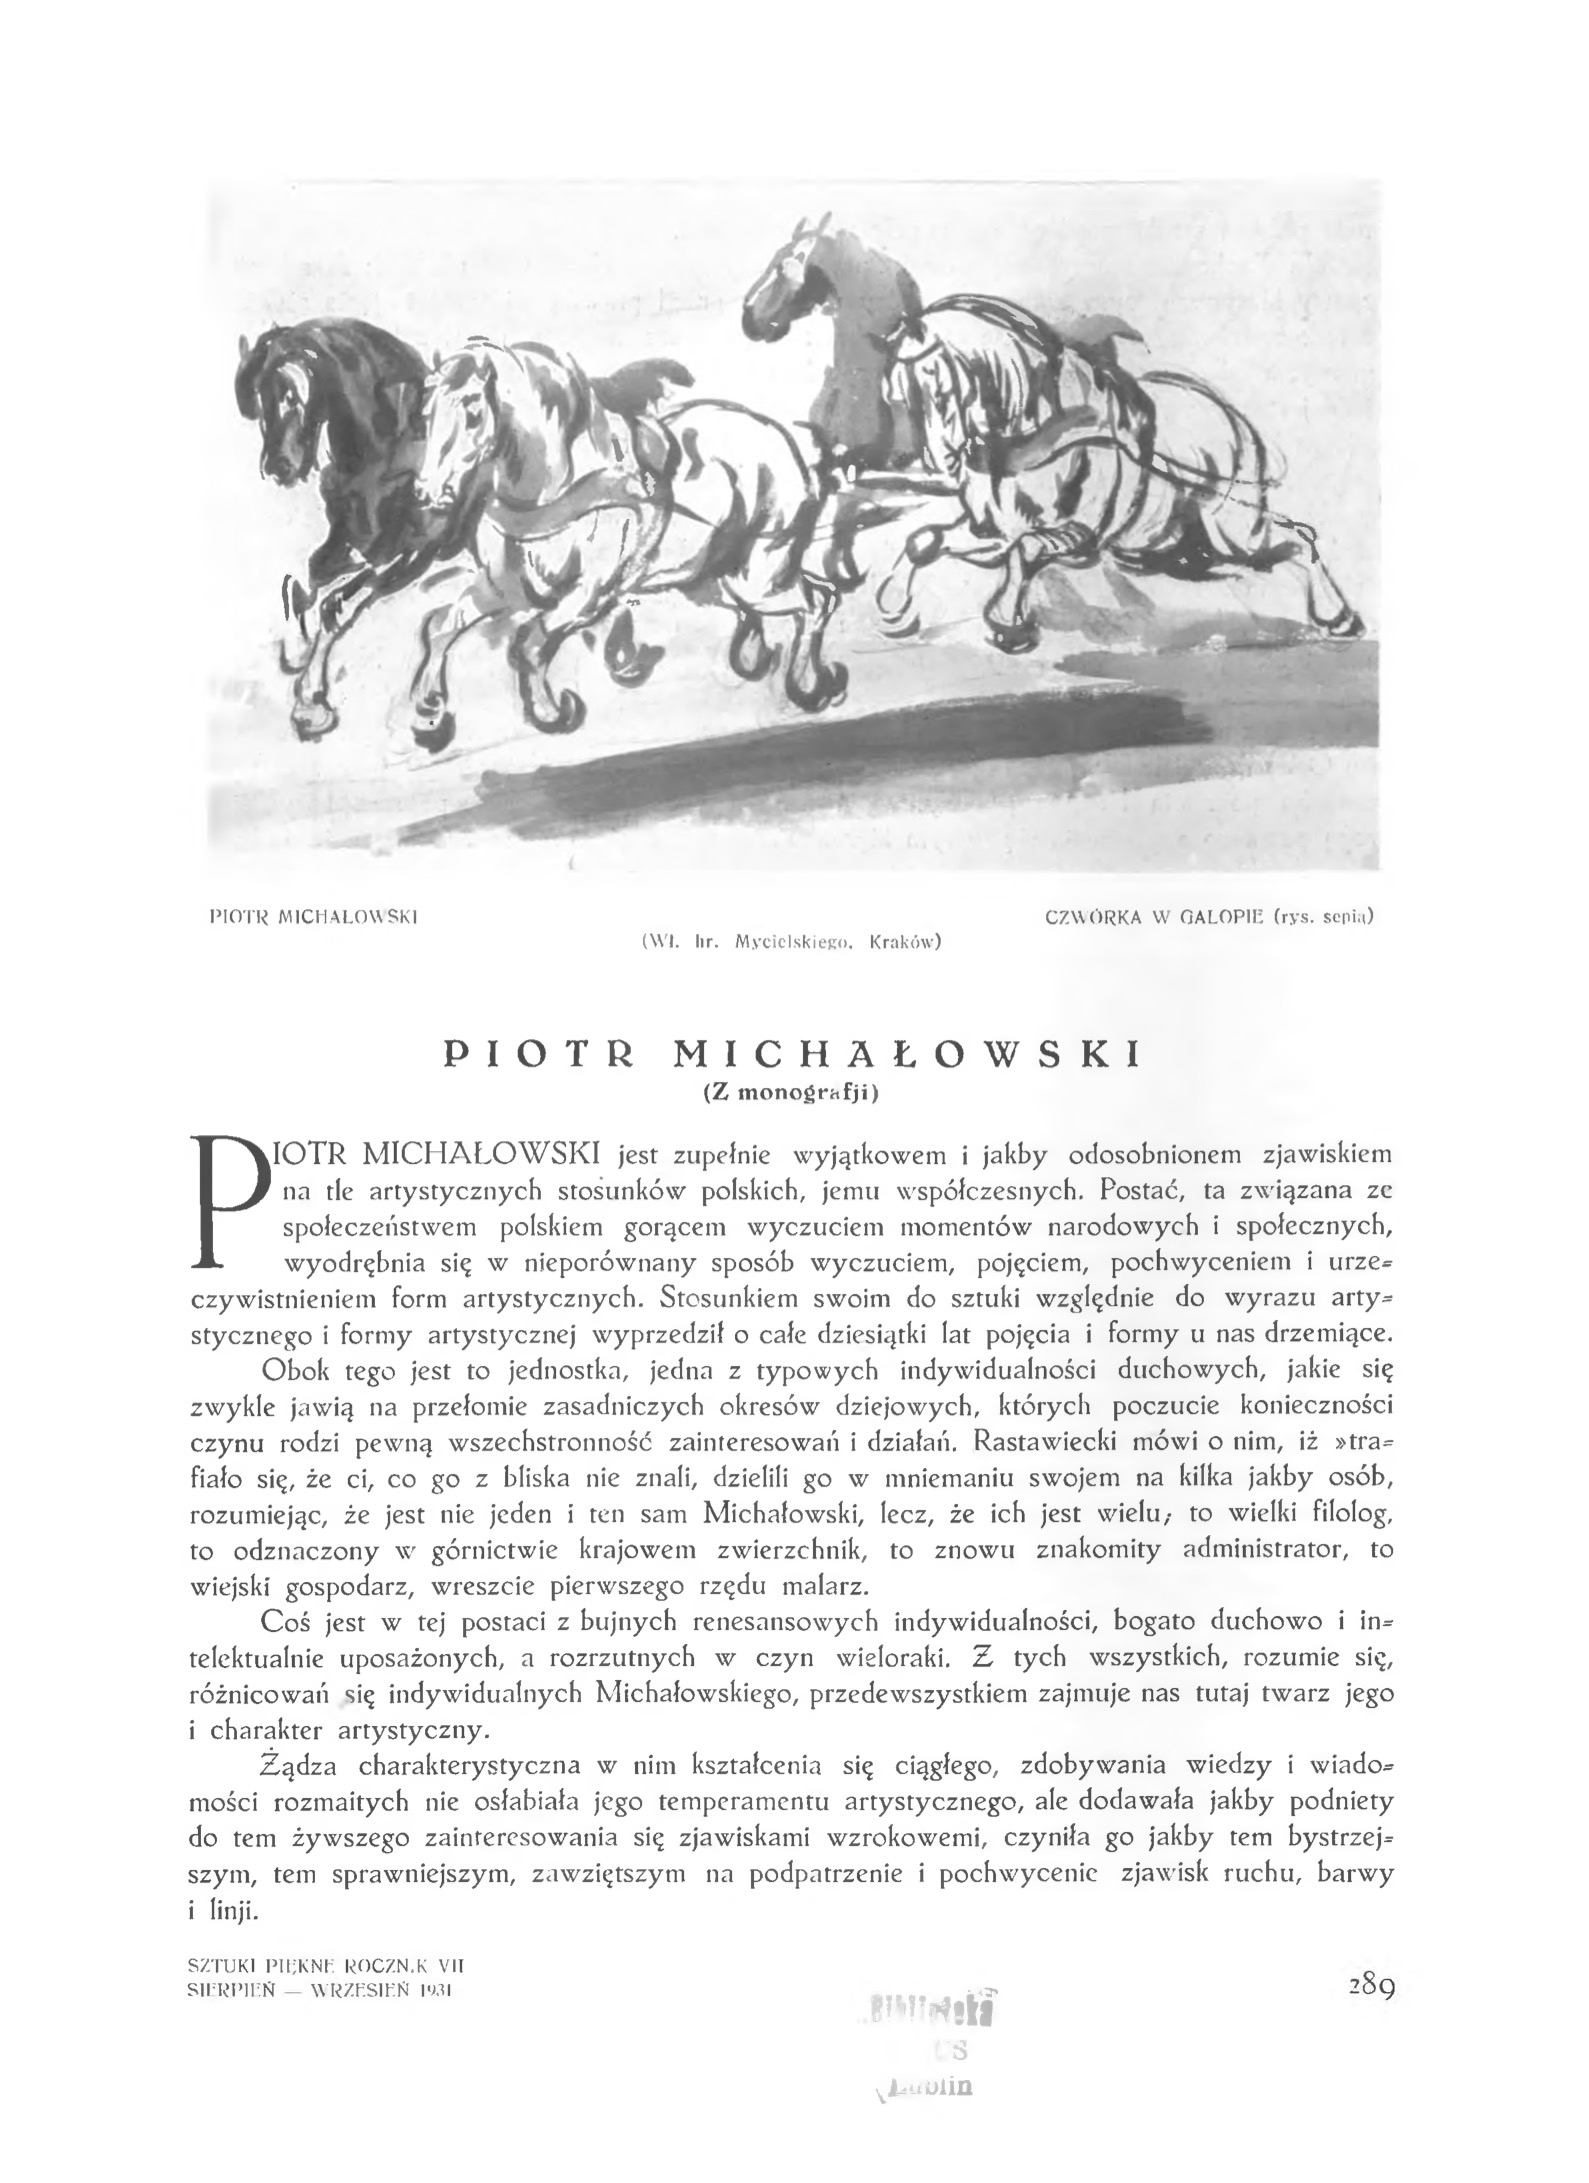 Fotografia przedstawiająca Reproductions of works by Piotr Michałowski in the collections of the Belvedere in Vienna and the Musée Curtius in Liège